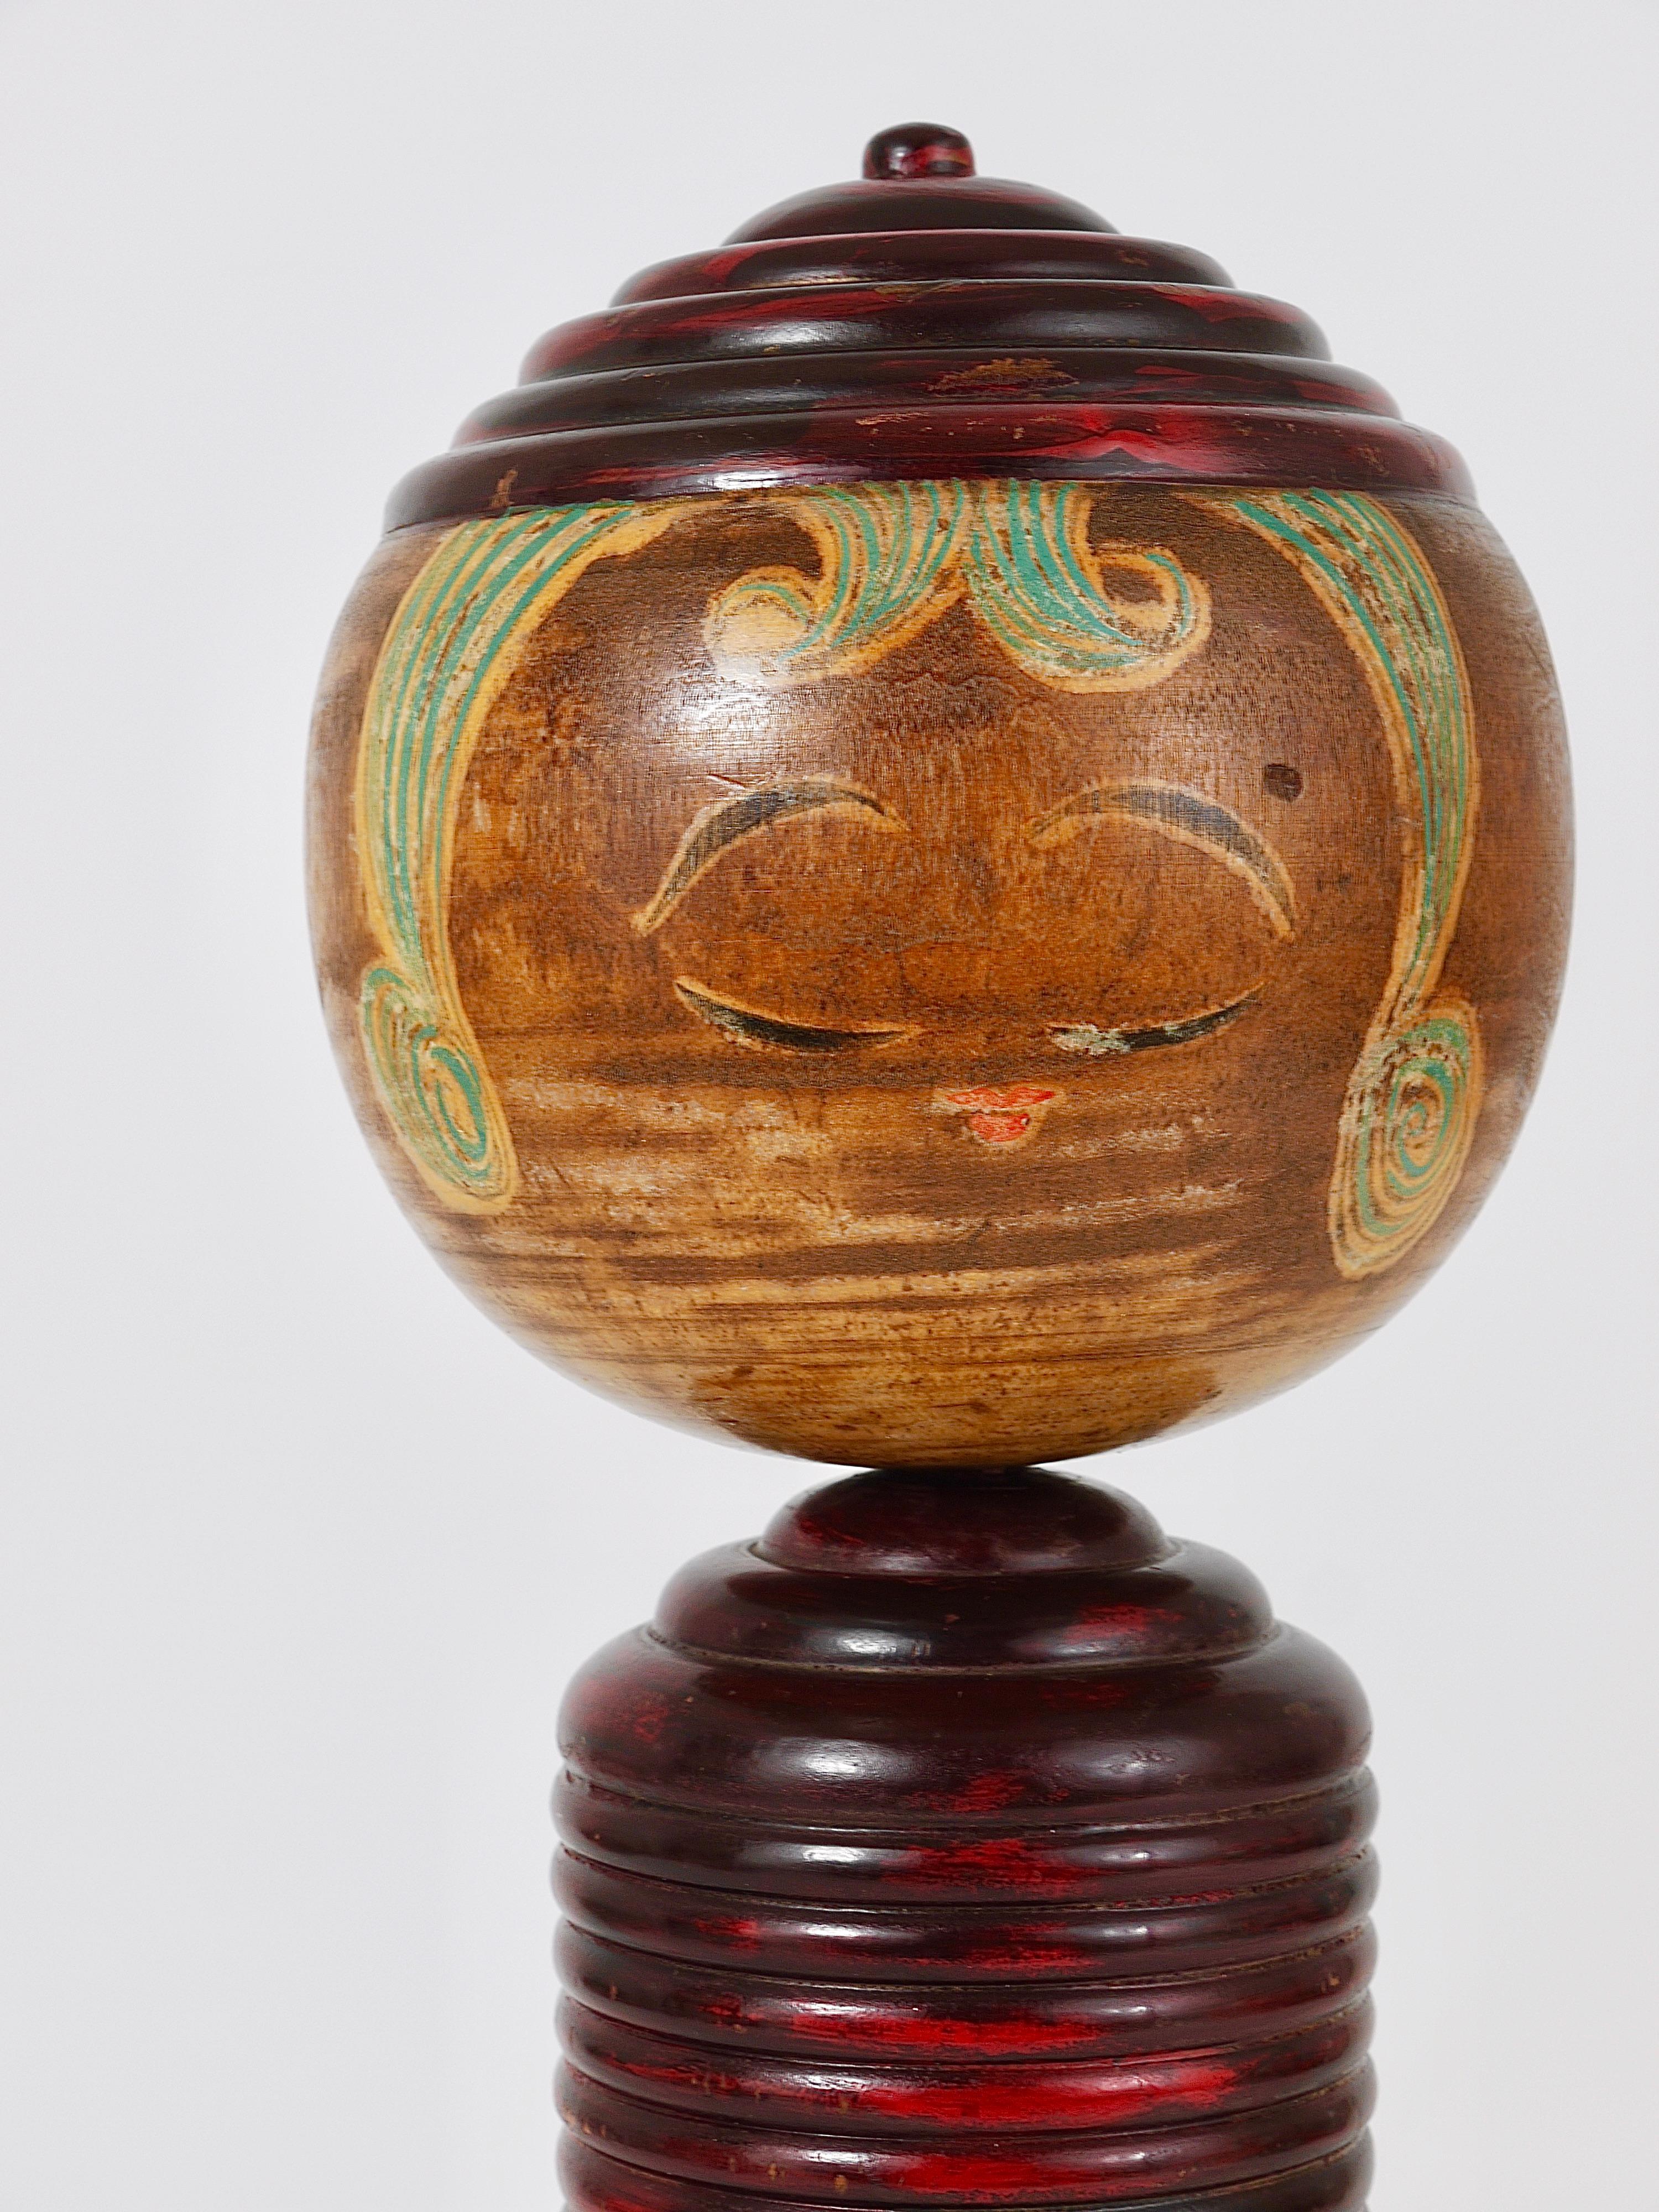 Hand-Carved Decorative Kokeshi Doll Sculpture from Northern Japan, Hand-Painted, Signed For Sale